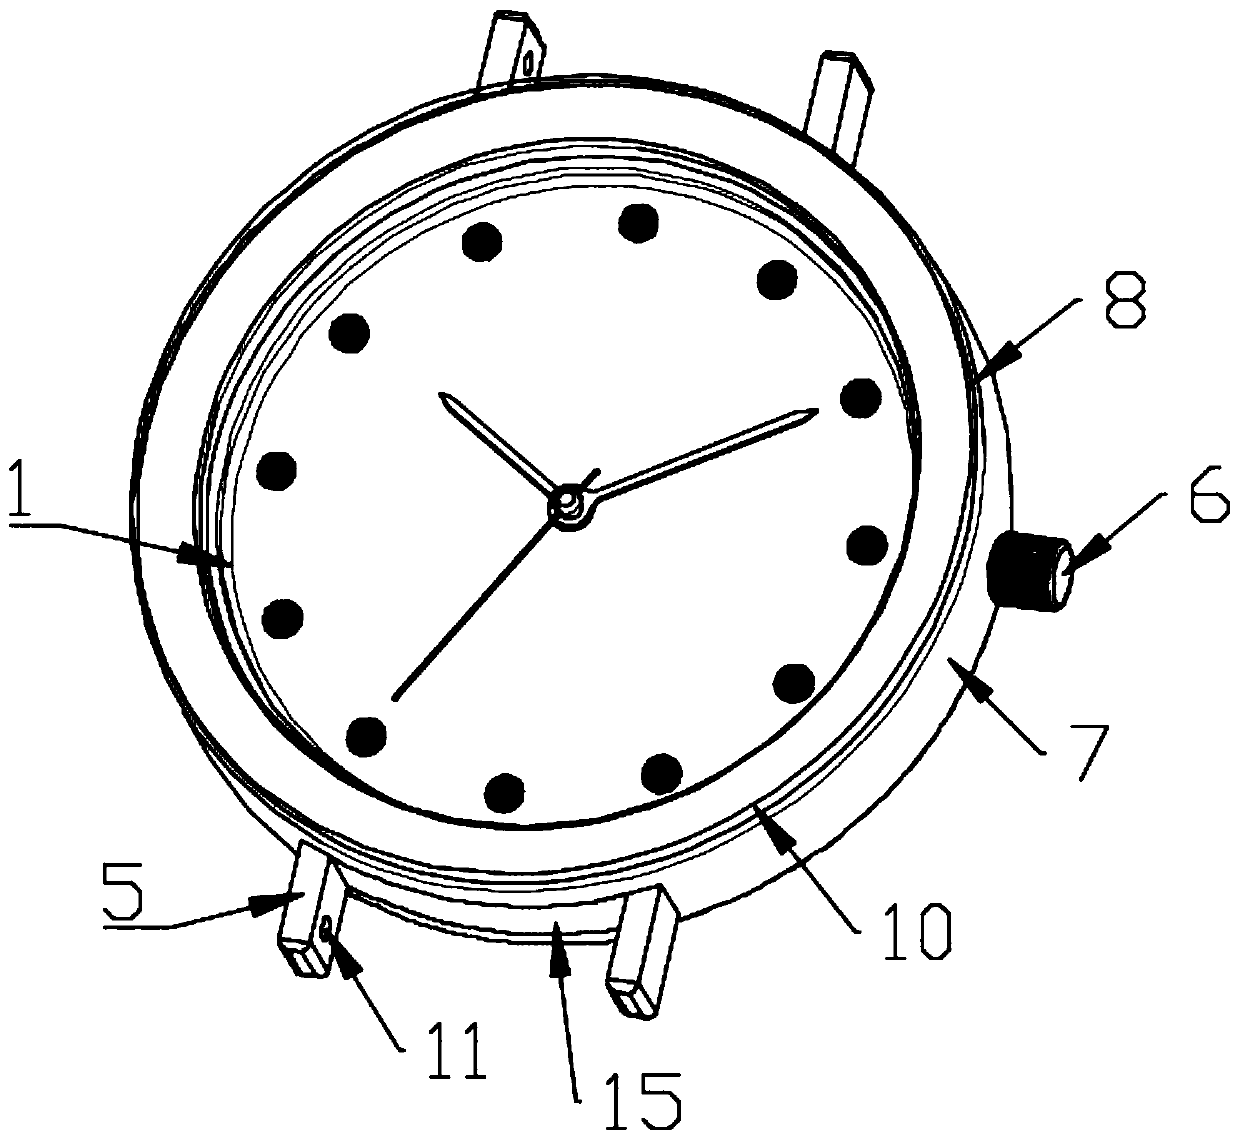 Novel watch with buffering and anti-falling functions